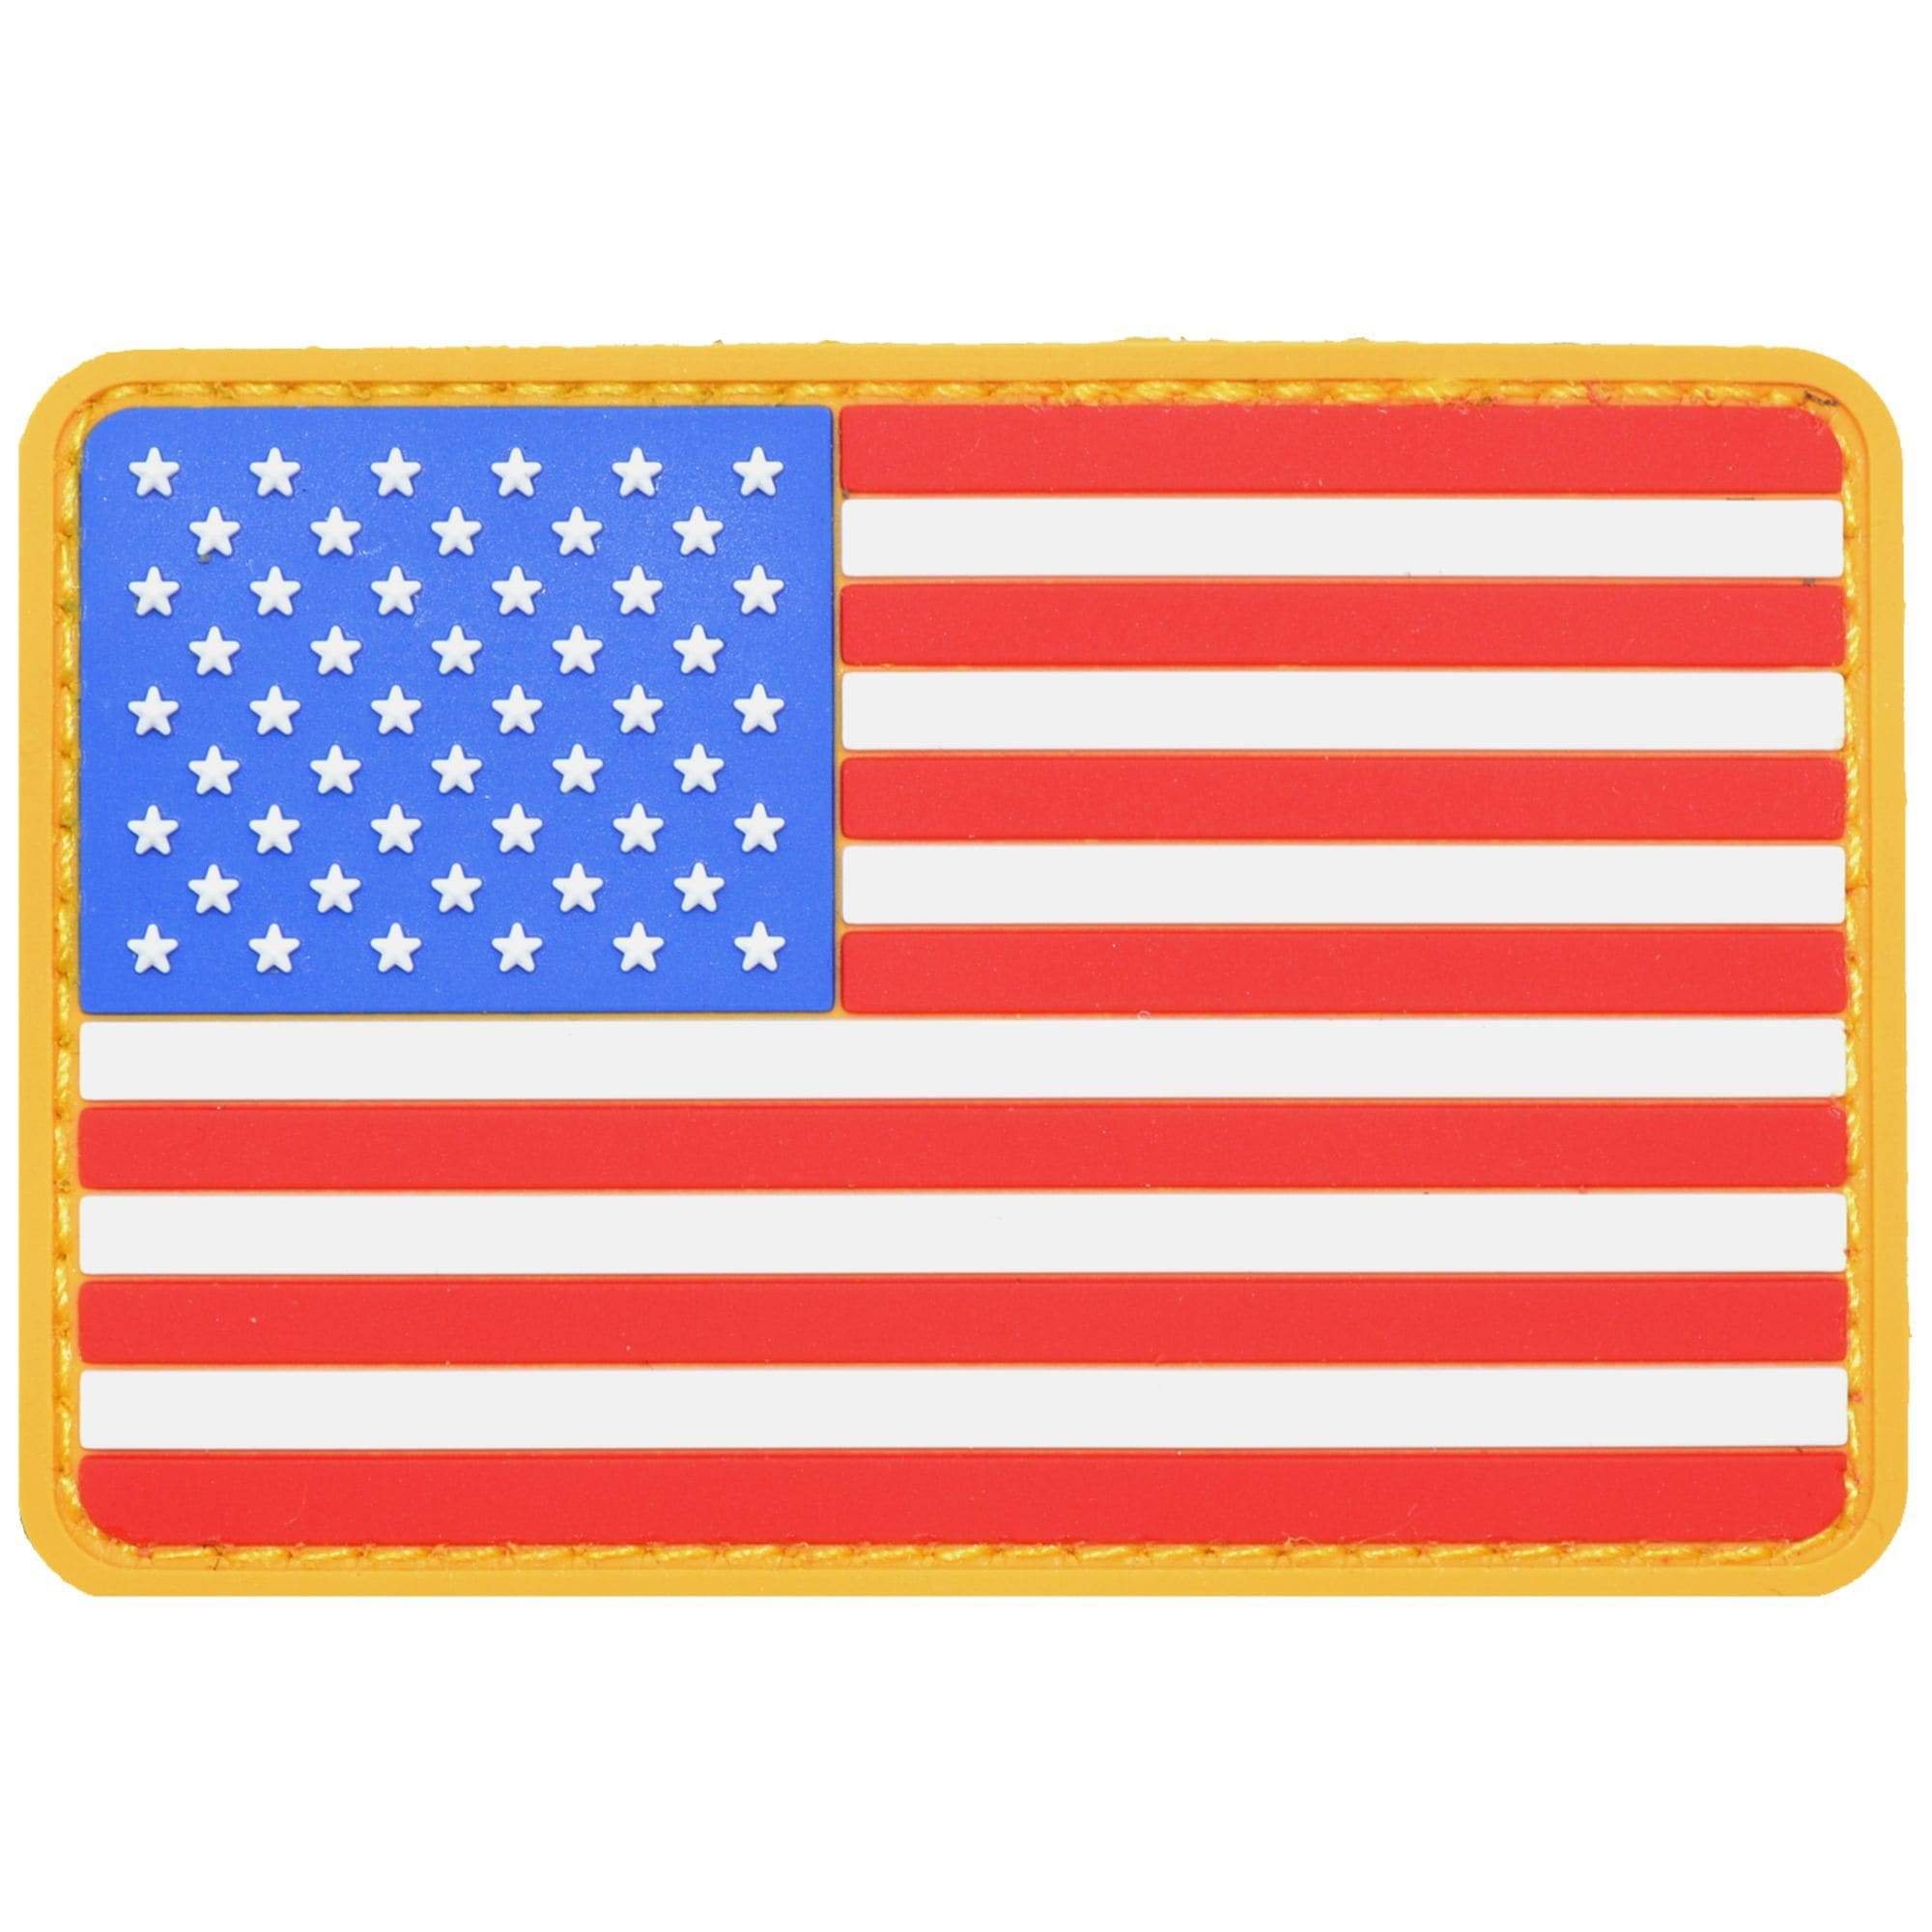 Tactical Gear Junkie Patches US Flag Full Color - 2x3 PVC Patch